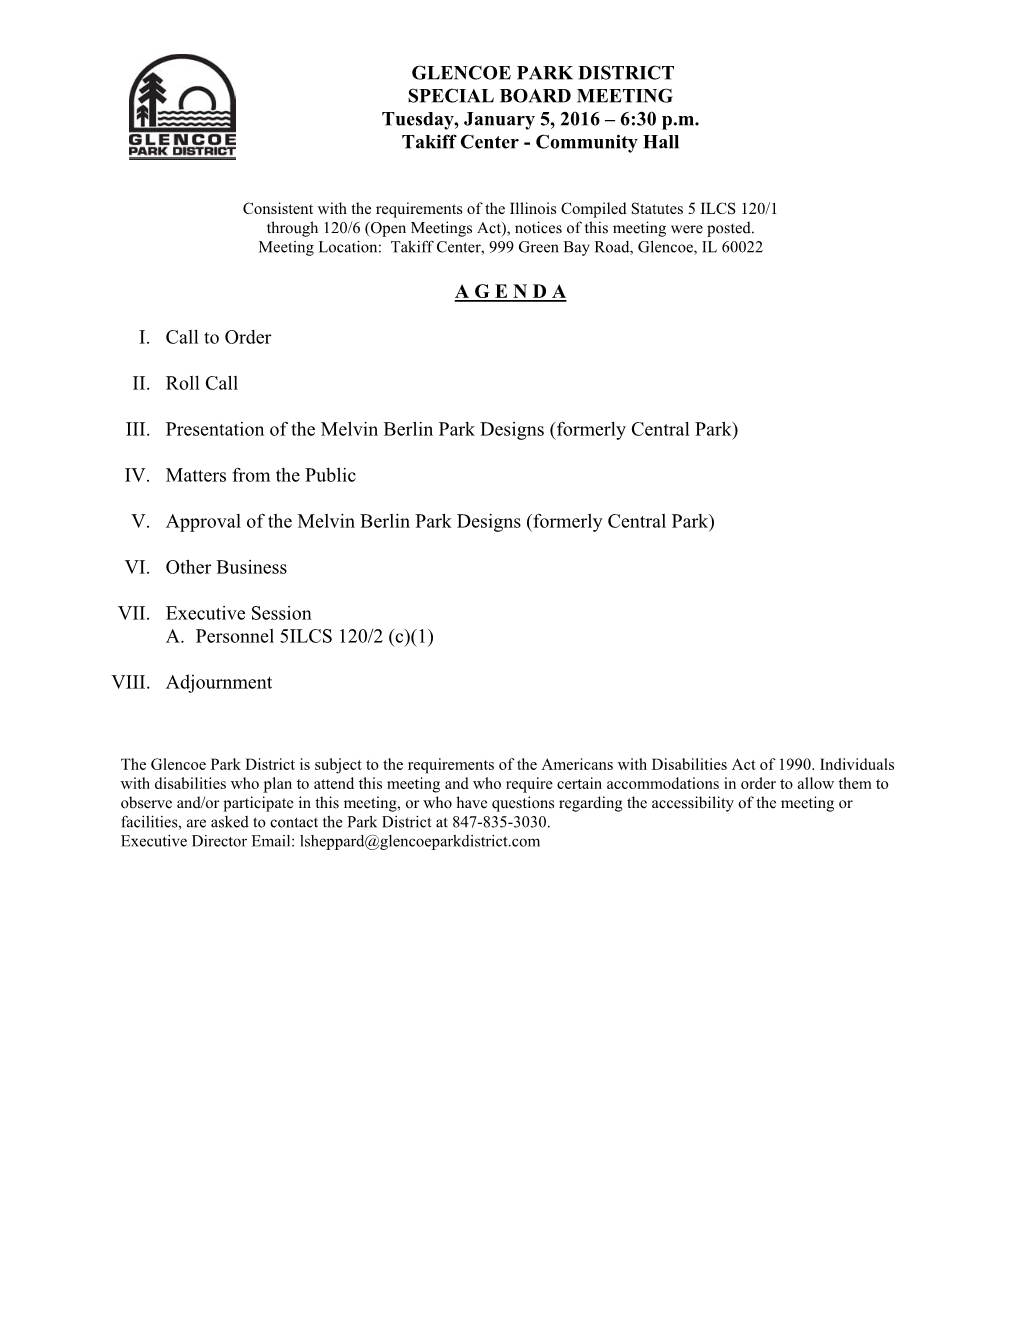 GLENCOE PARK DISTRICT SPECIAL BOARD MEETING Tuesday, January 5, 2016 – 6:30 P.M